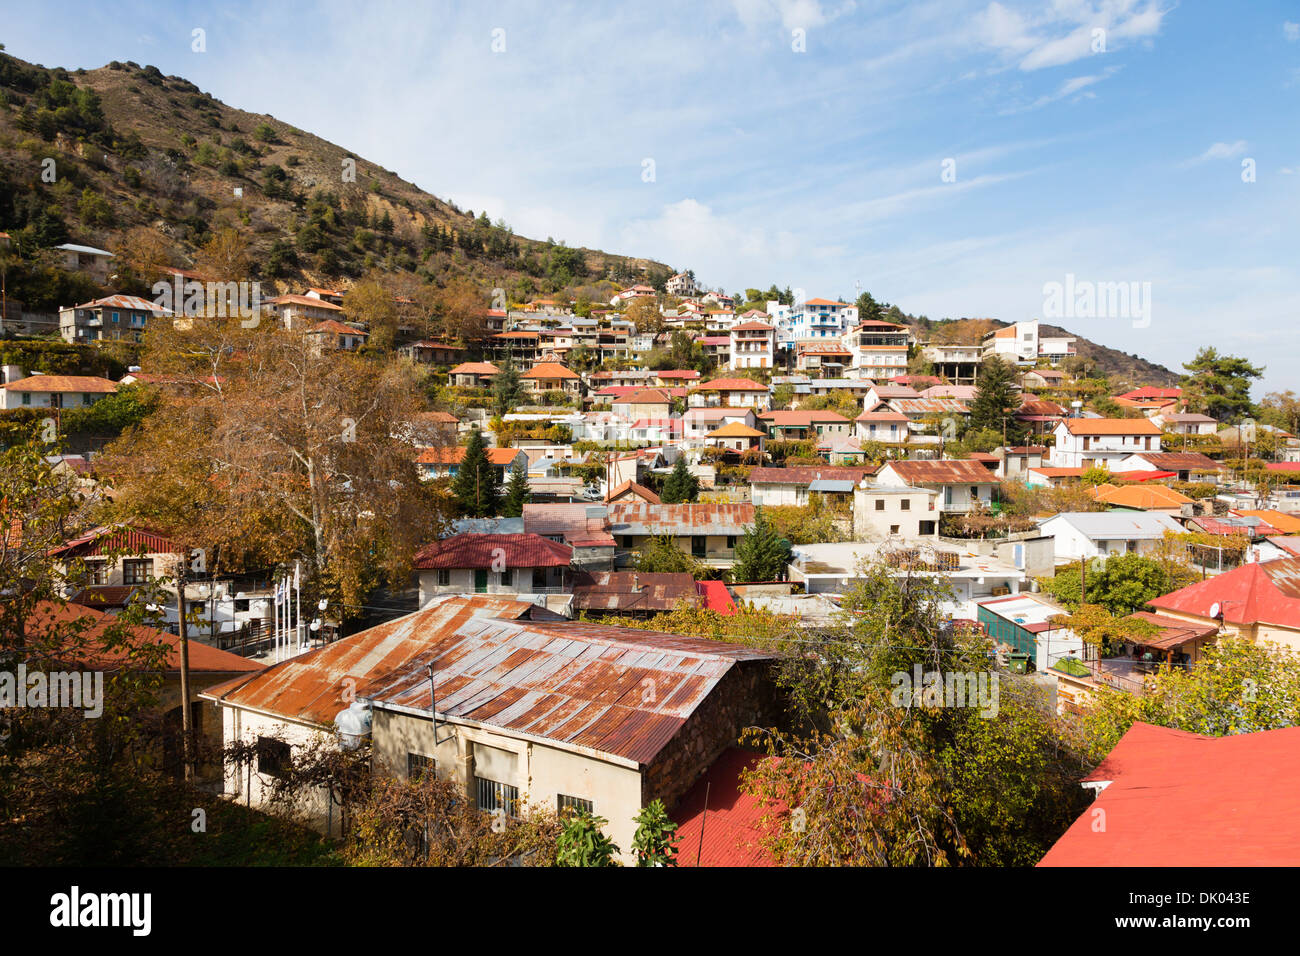 Pedoulias village clinging to the side of the Troodos mountains, Cyprus. Stock Photo